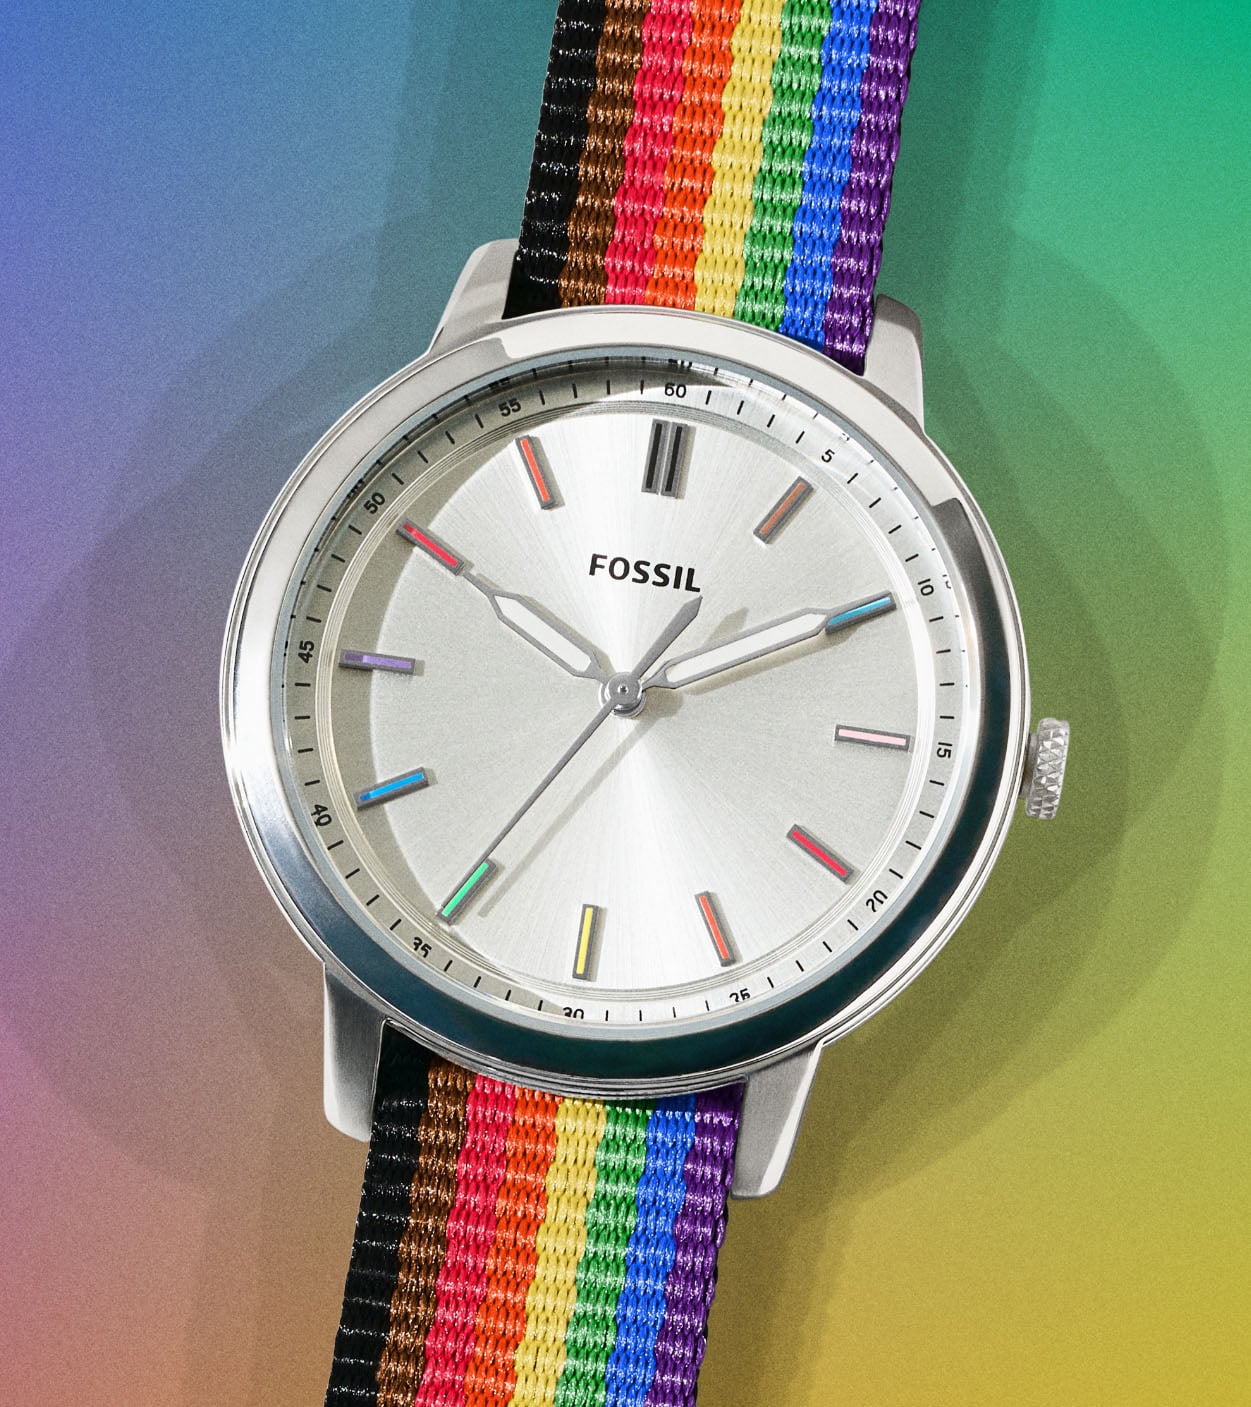 Pride watch by Fossil